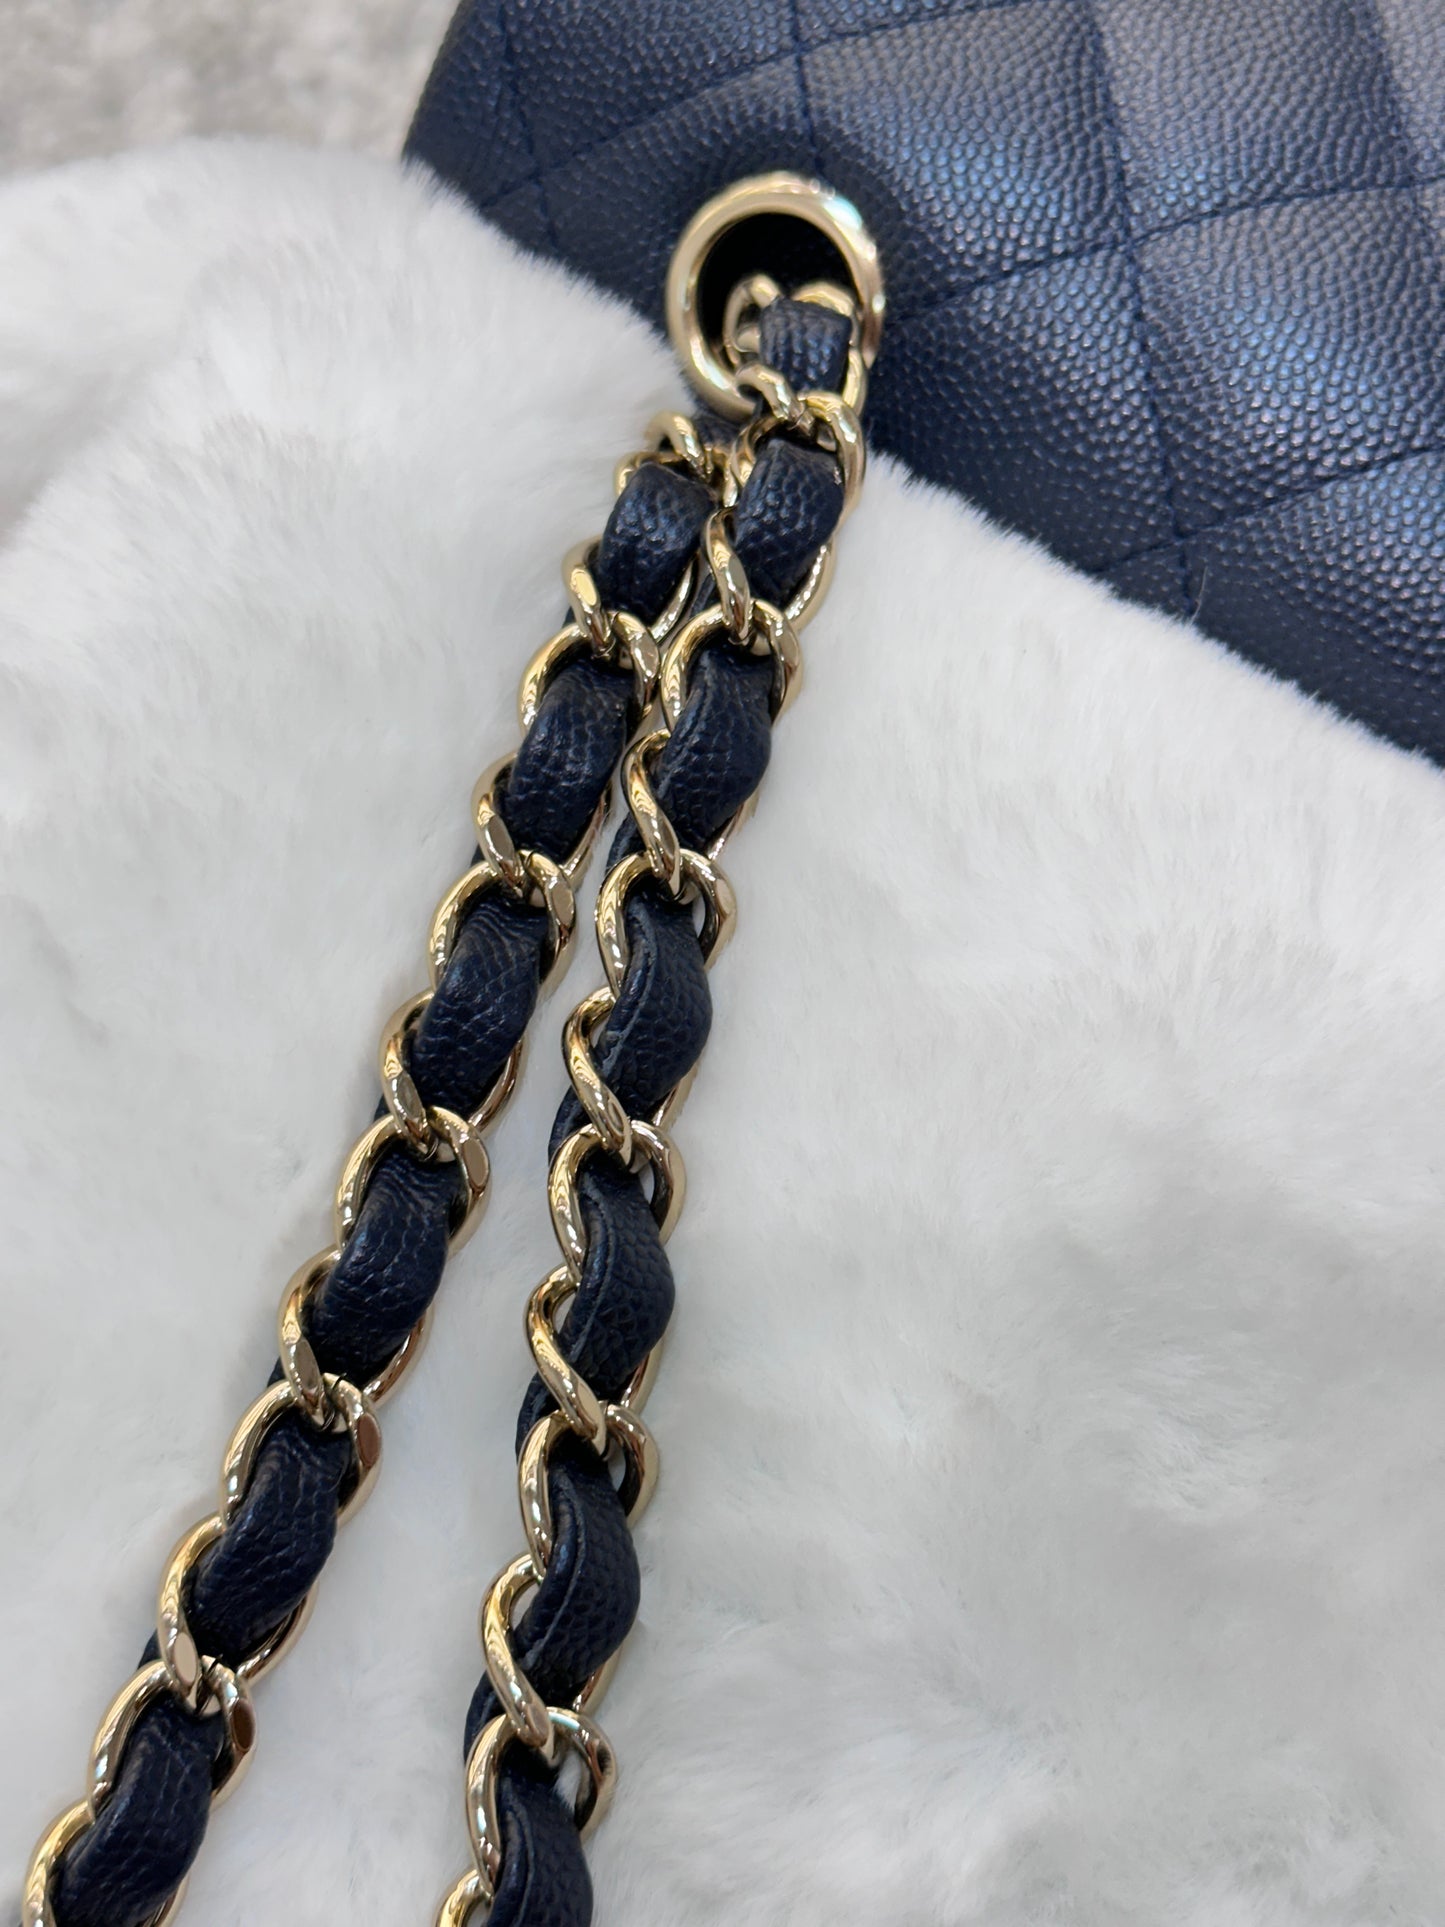 CHANEL Caviar Quilted Medium Double Flap 18B Navy